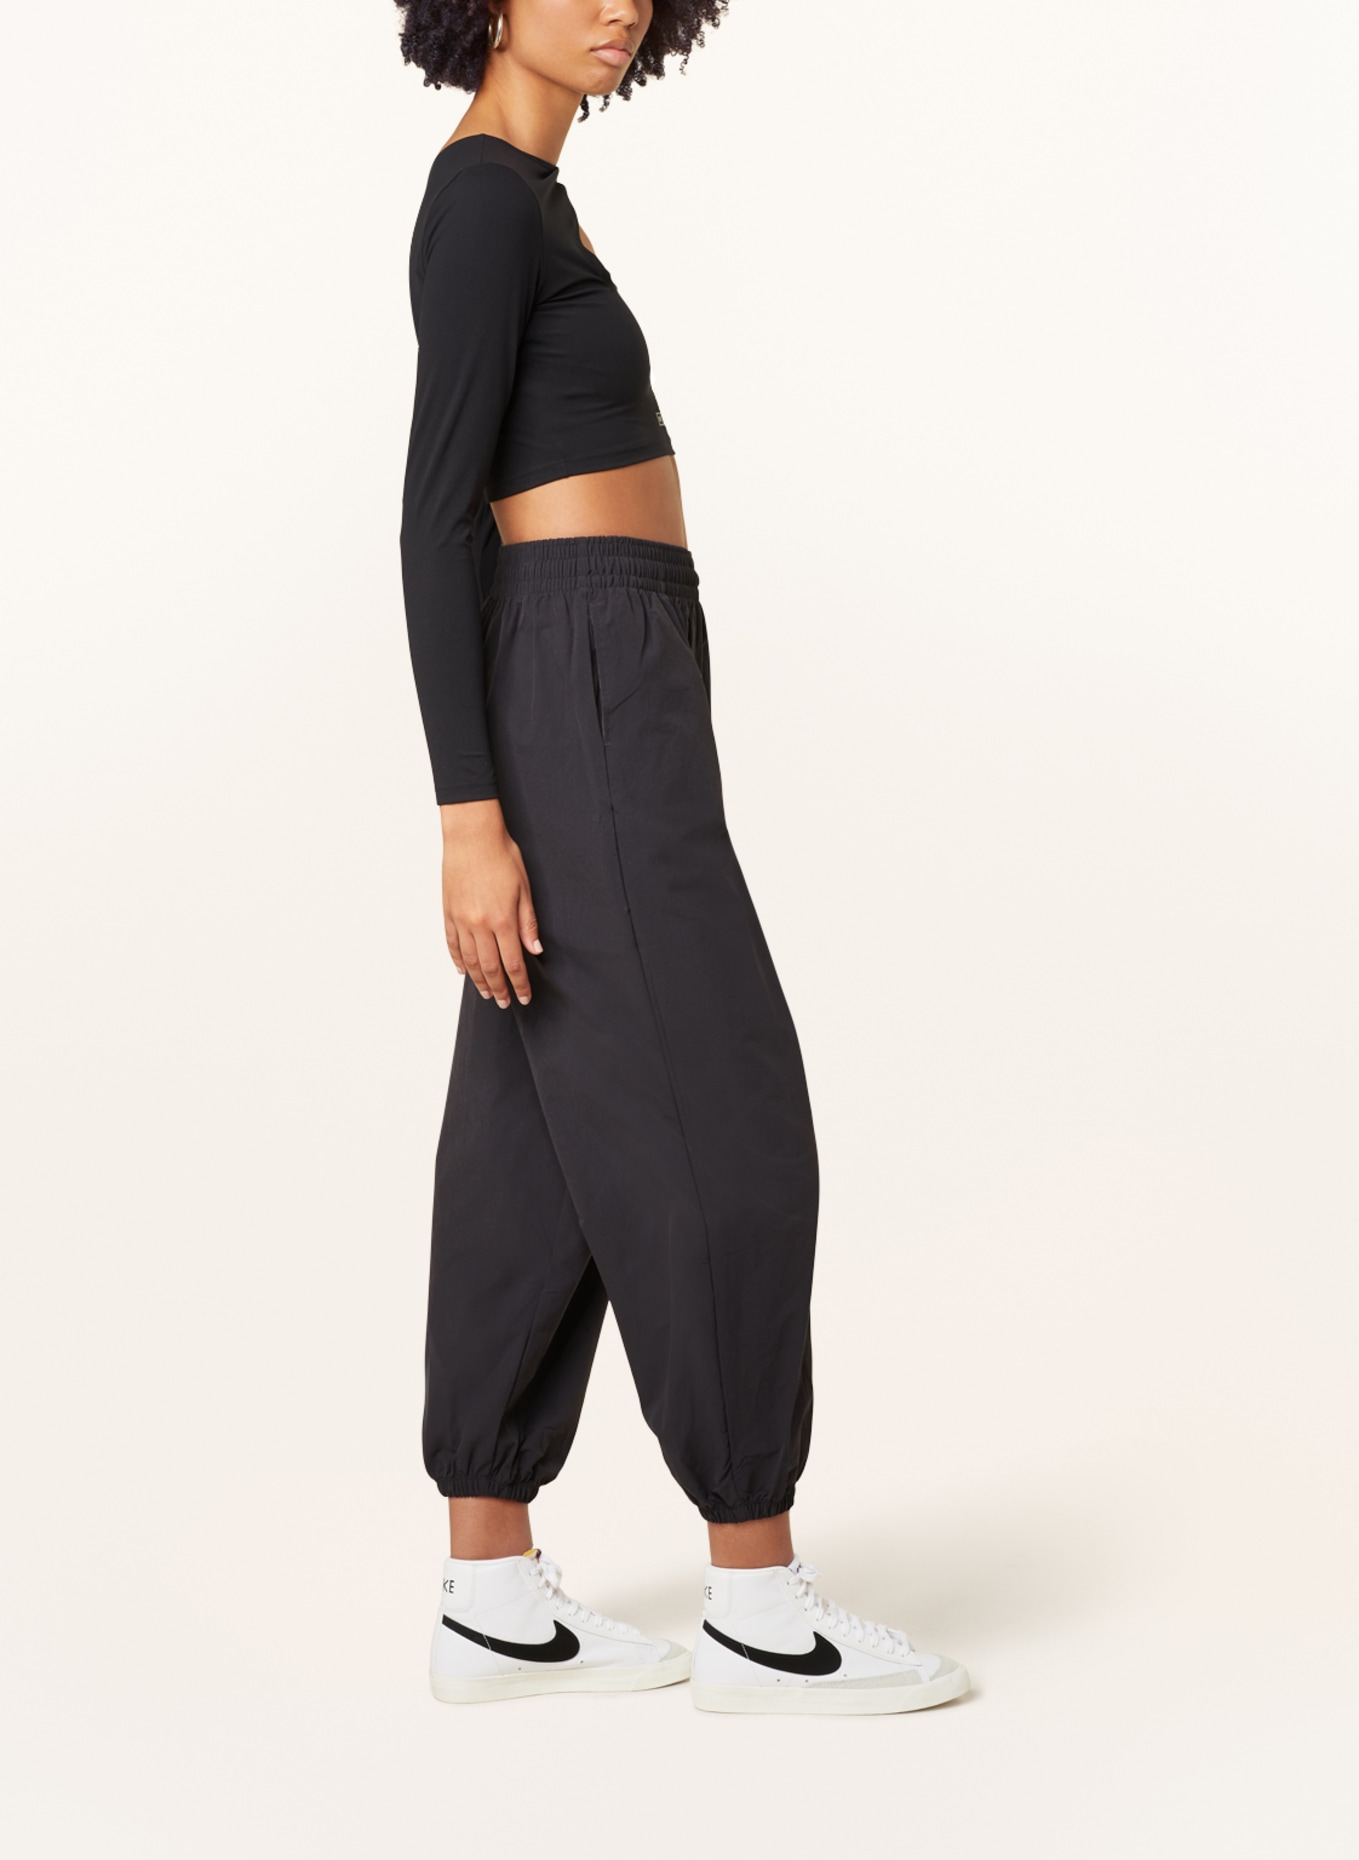 Nike Pants in jogger style, Color: BLACK/ WHITE/ LIGHT GRAY (Image 4)